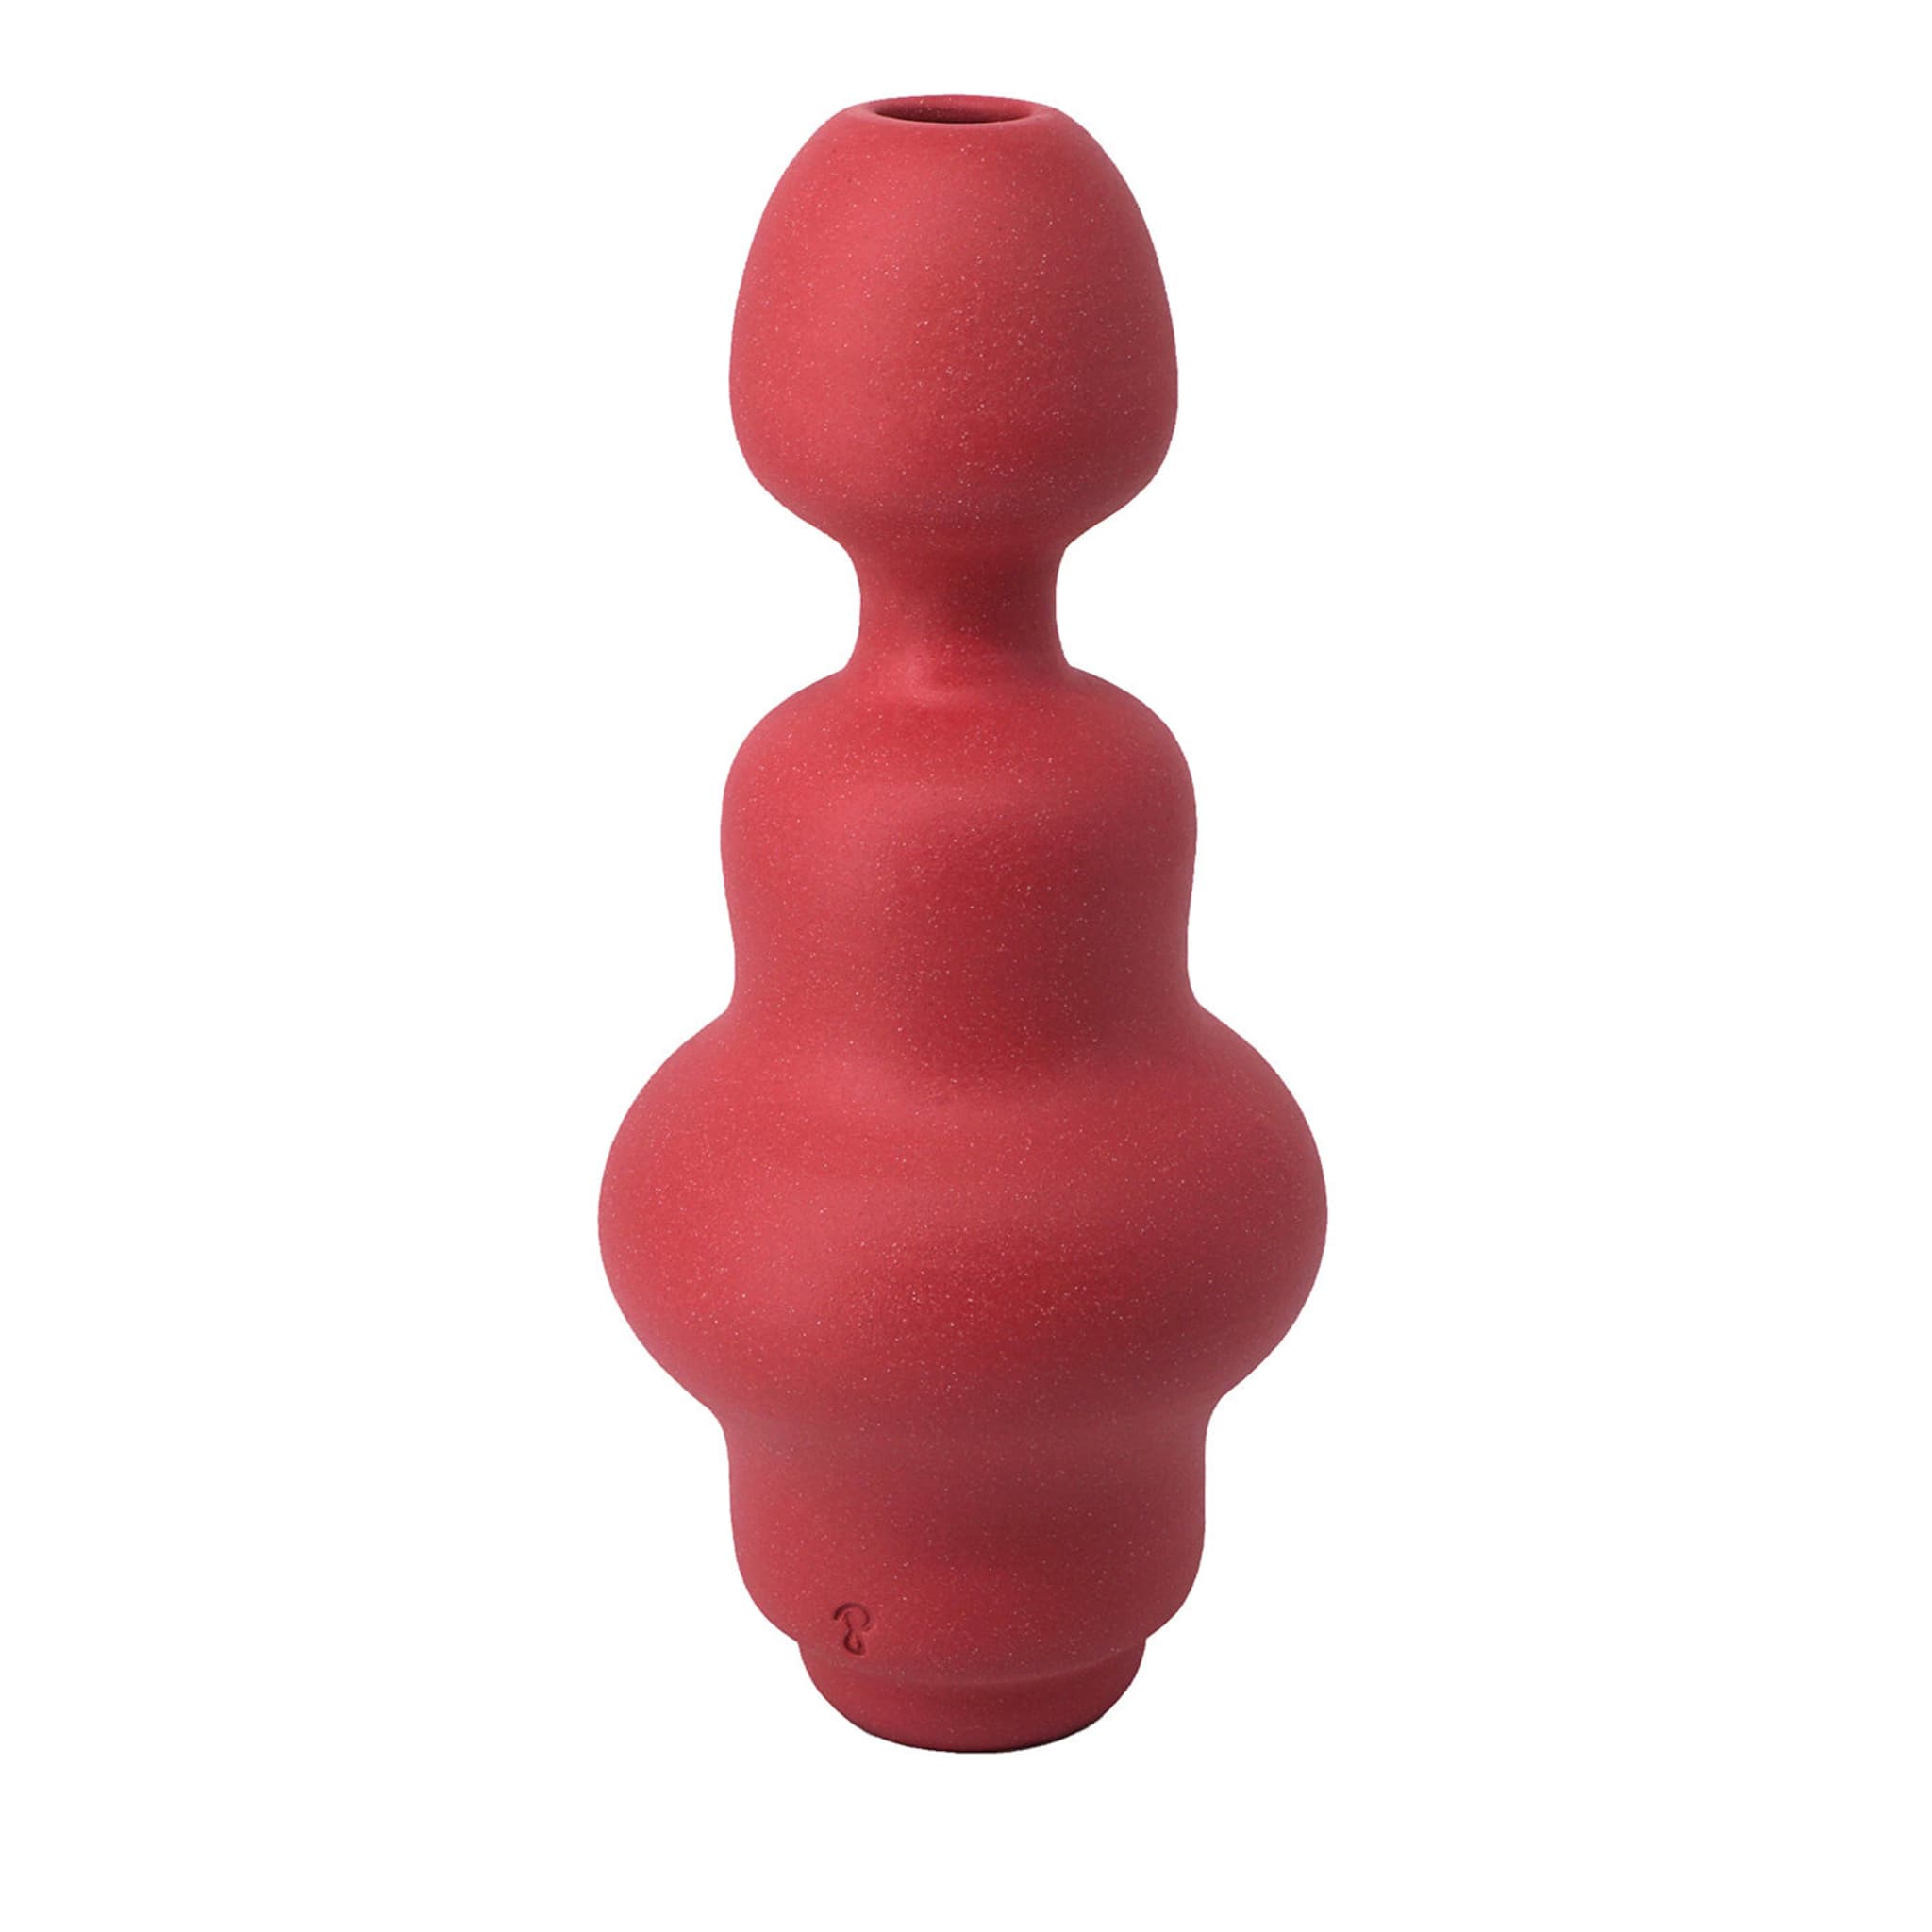 Crisalide Red Vase #6 - Main view